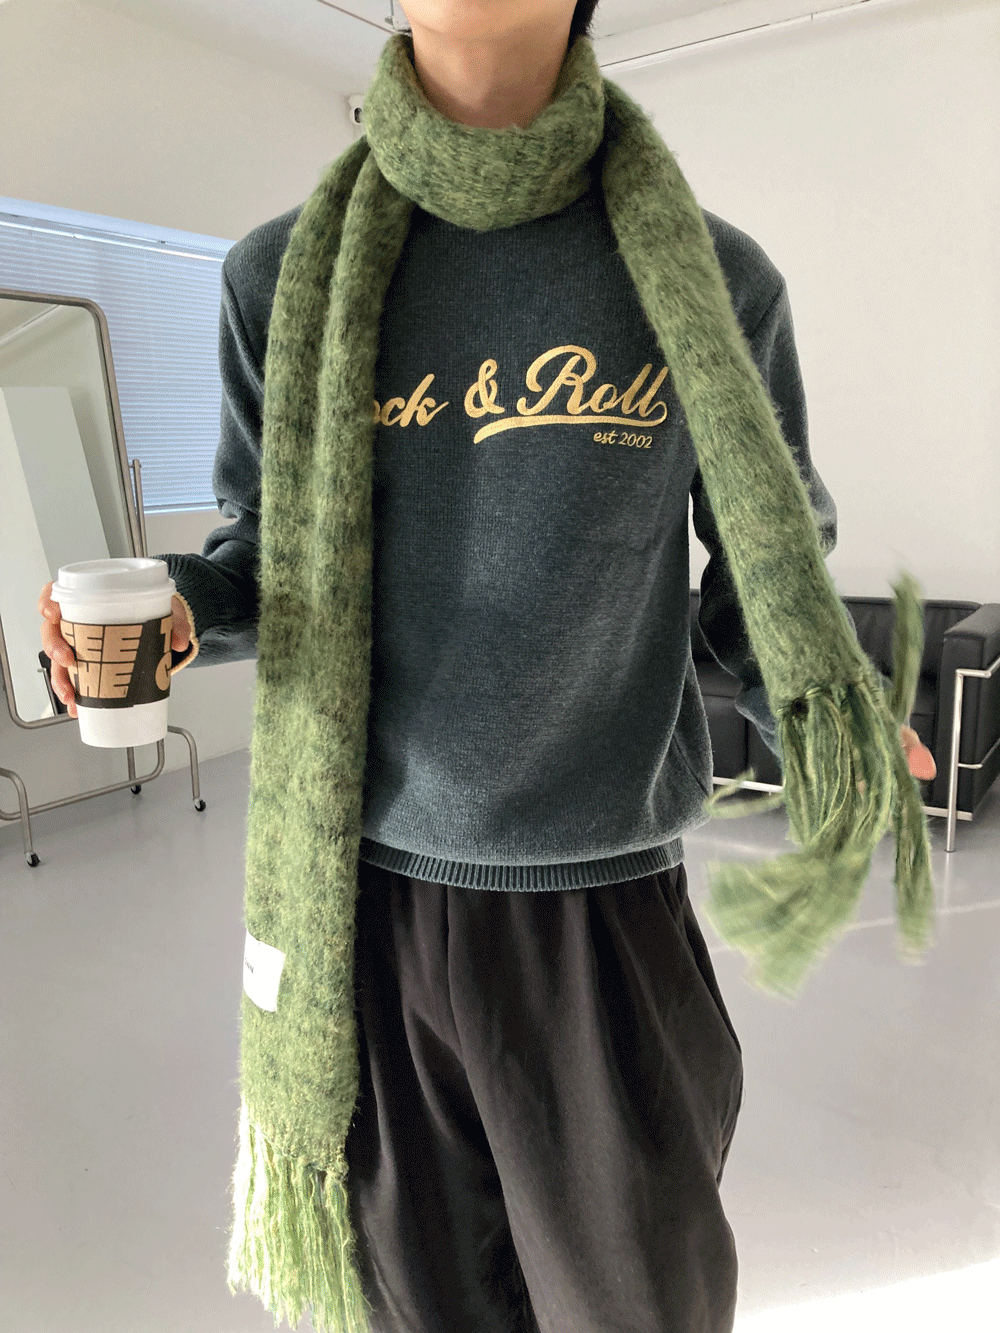 [Wool] Rock&amp;Roll knit (3color)